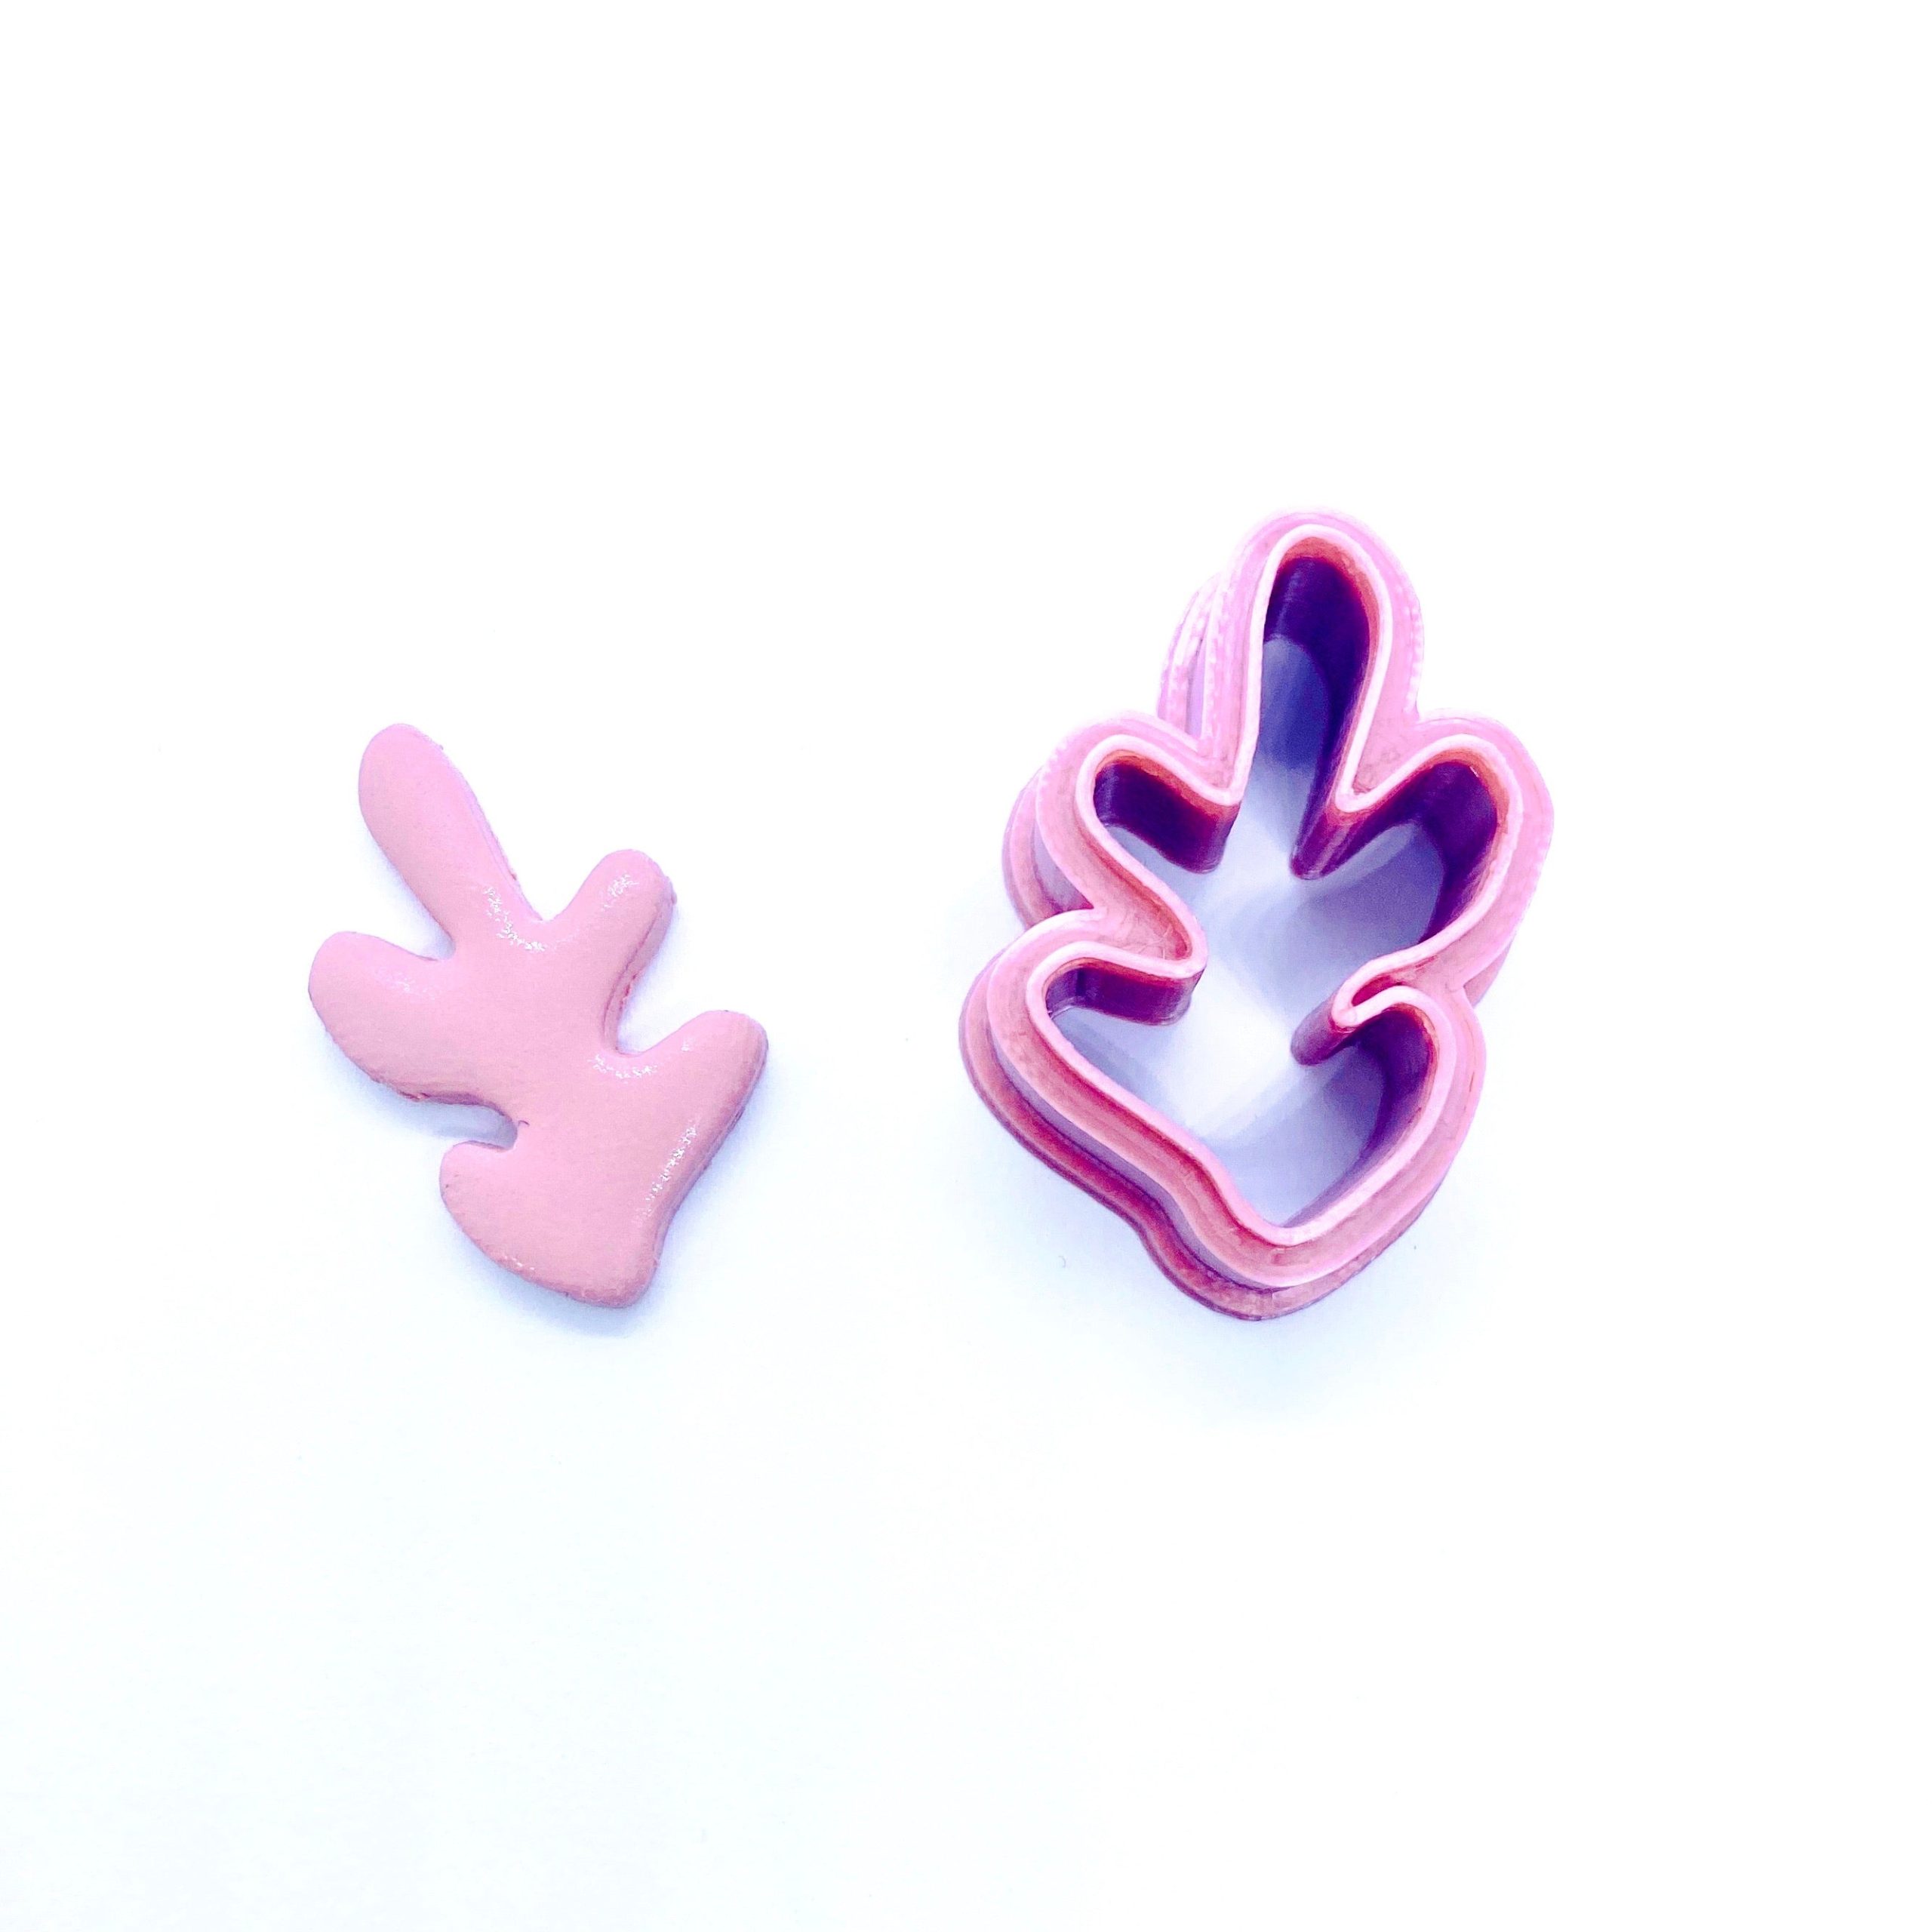 Abstract Plant Clay Cutter Cookie Cutter